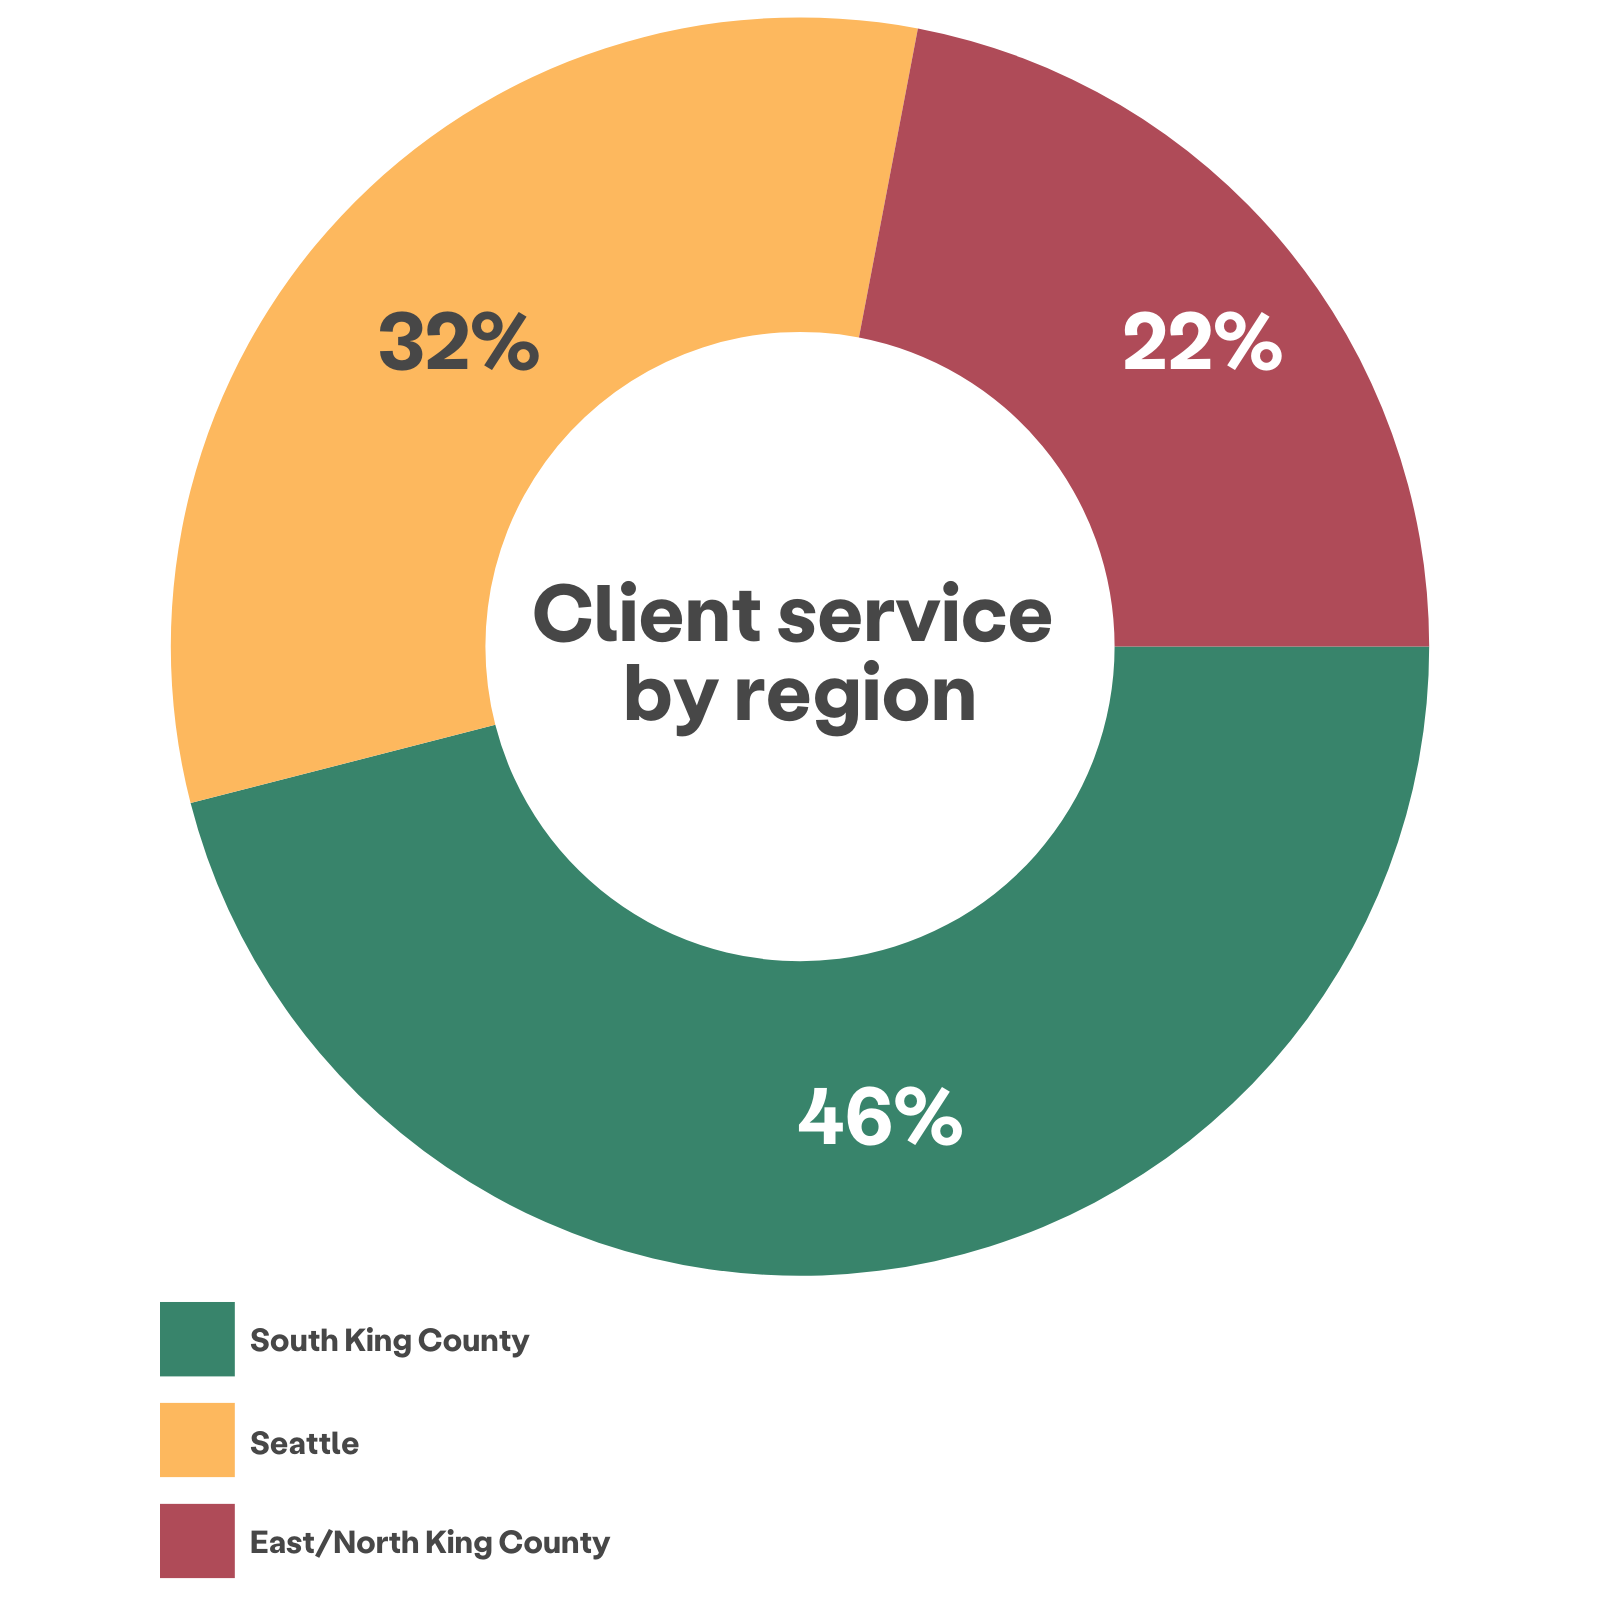 Client service by region donut chart showing 46% served from South King County, 32% from Seattle, 22% from East/North King County